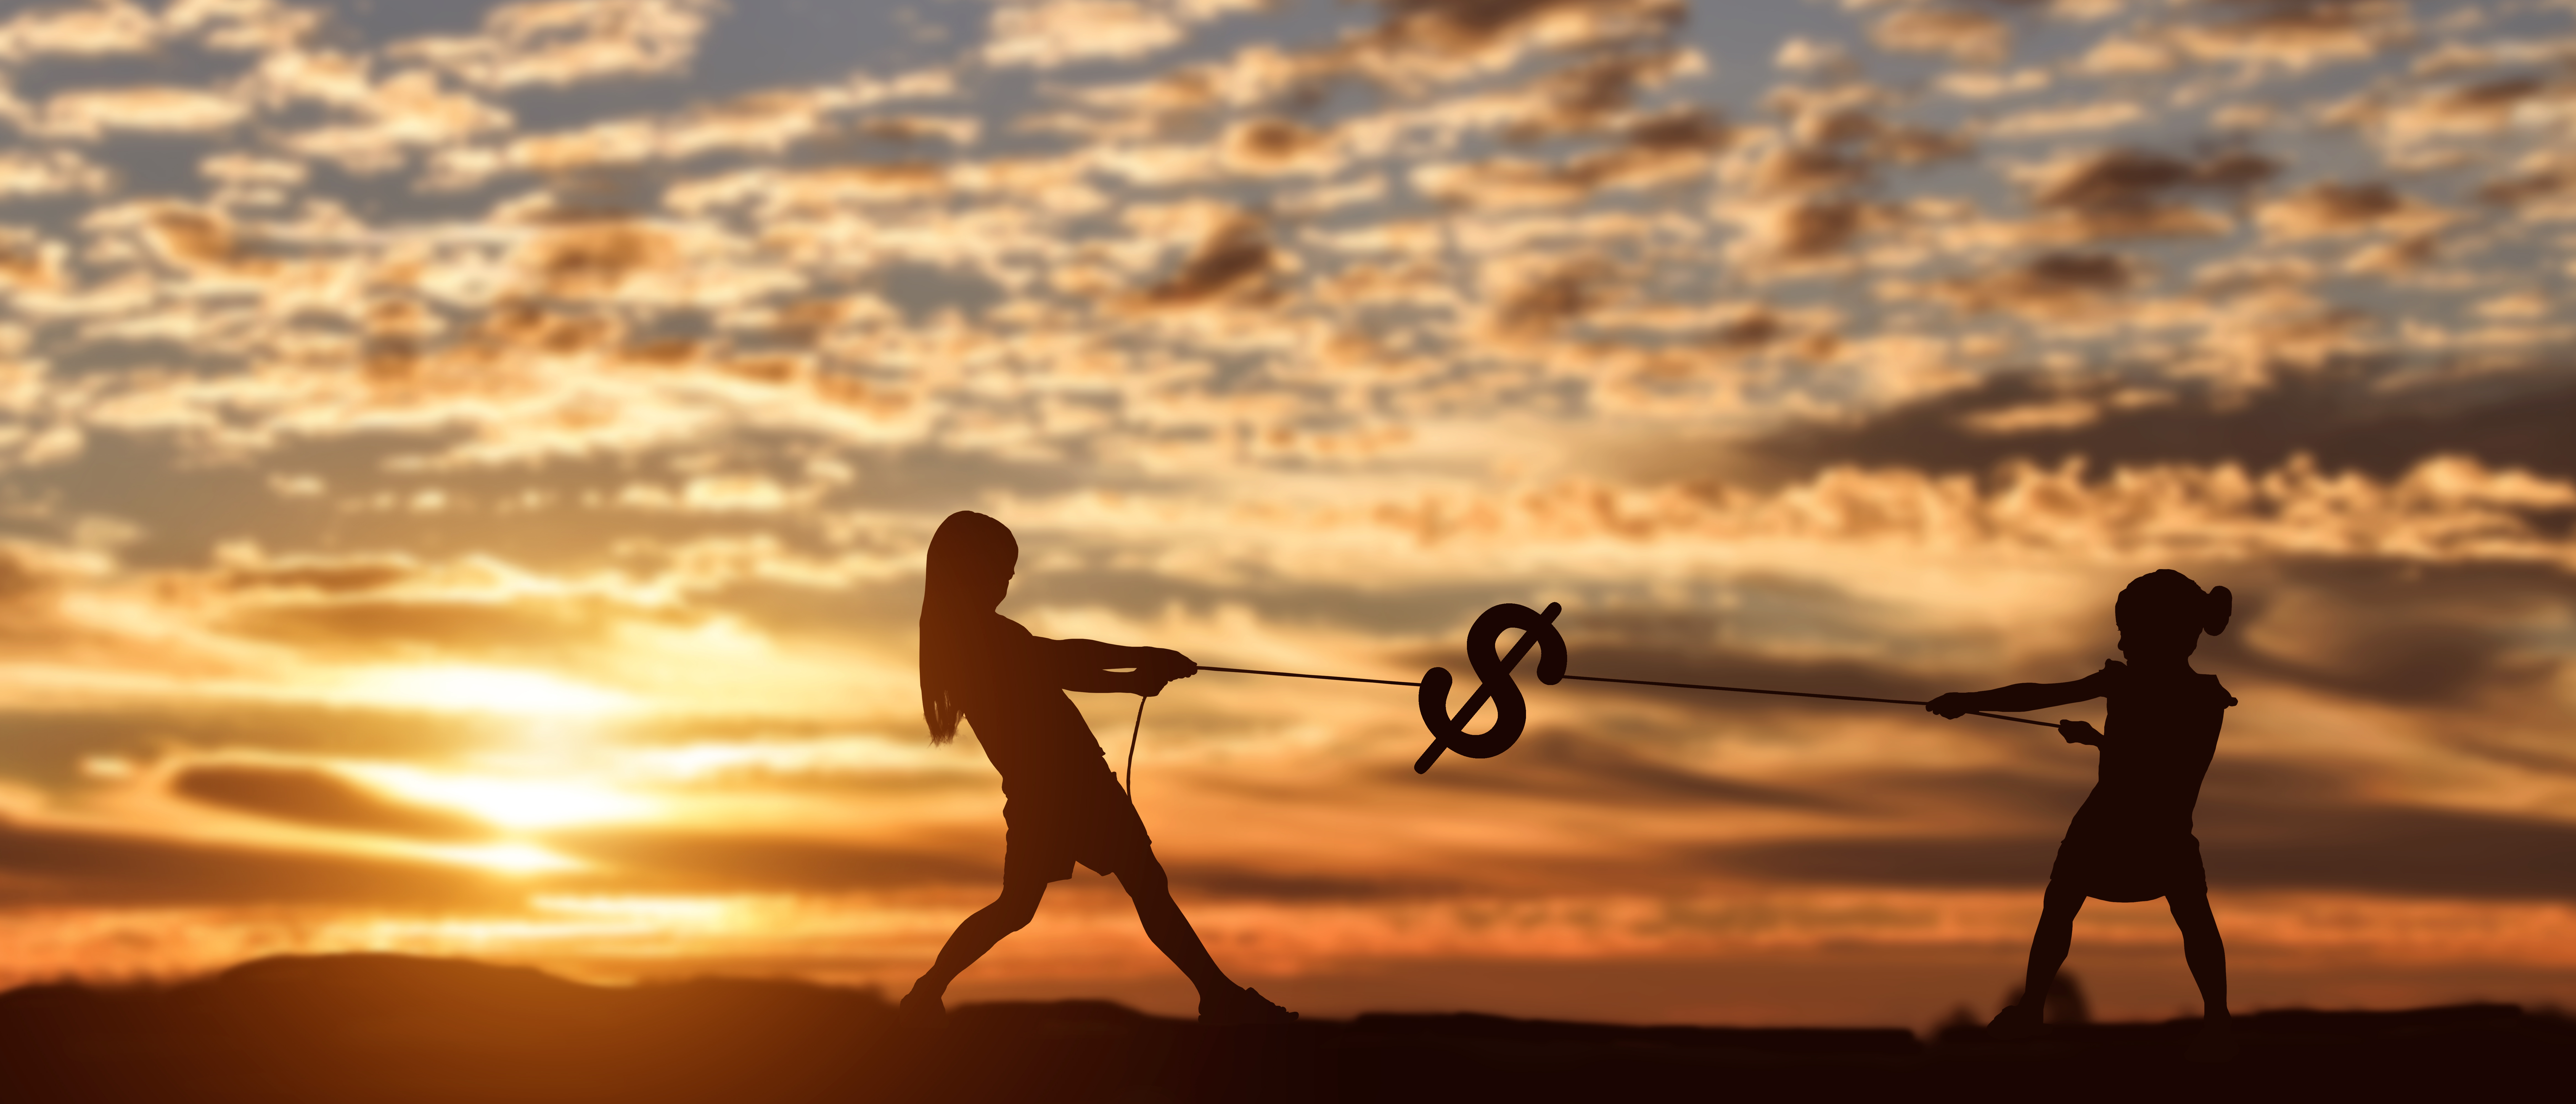 Silhouette of two girls pulling rope with a dollar sign dollar against a sunset background.